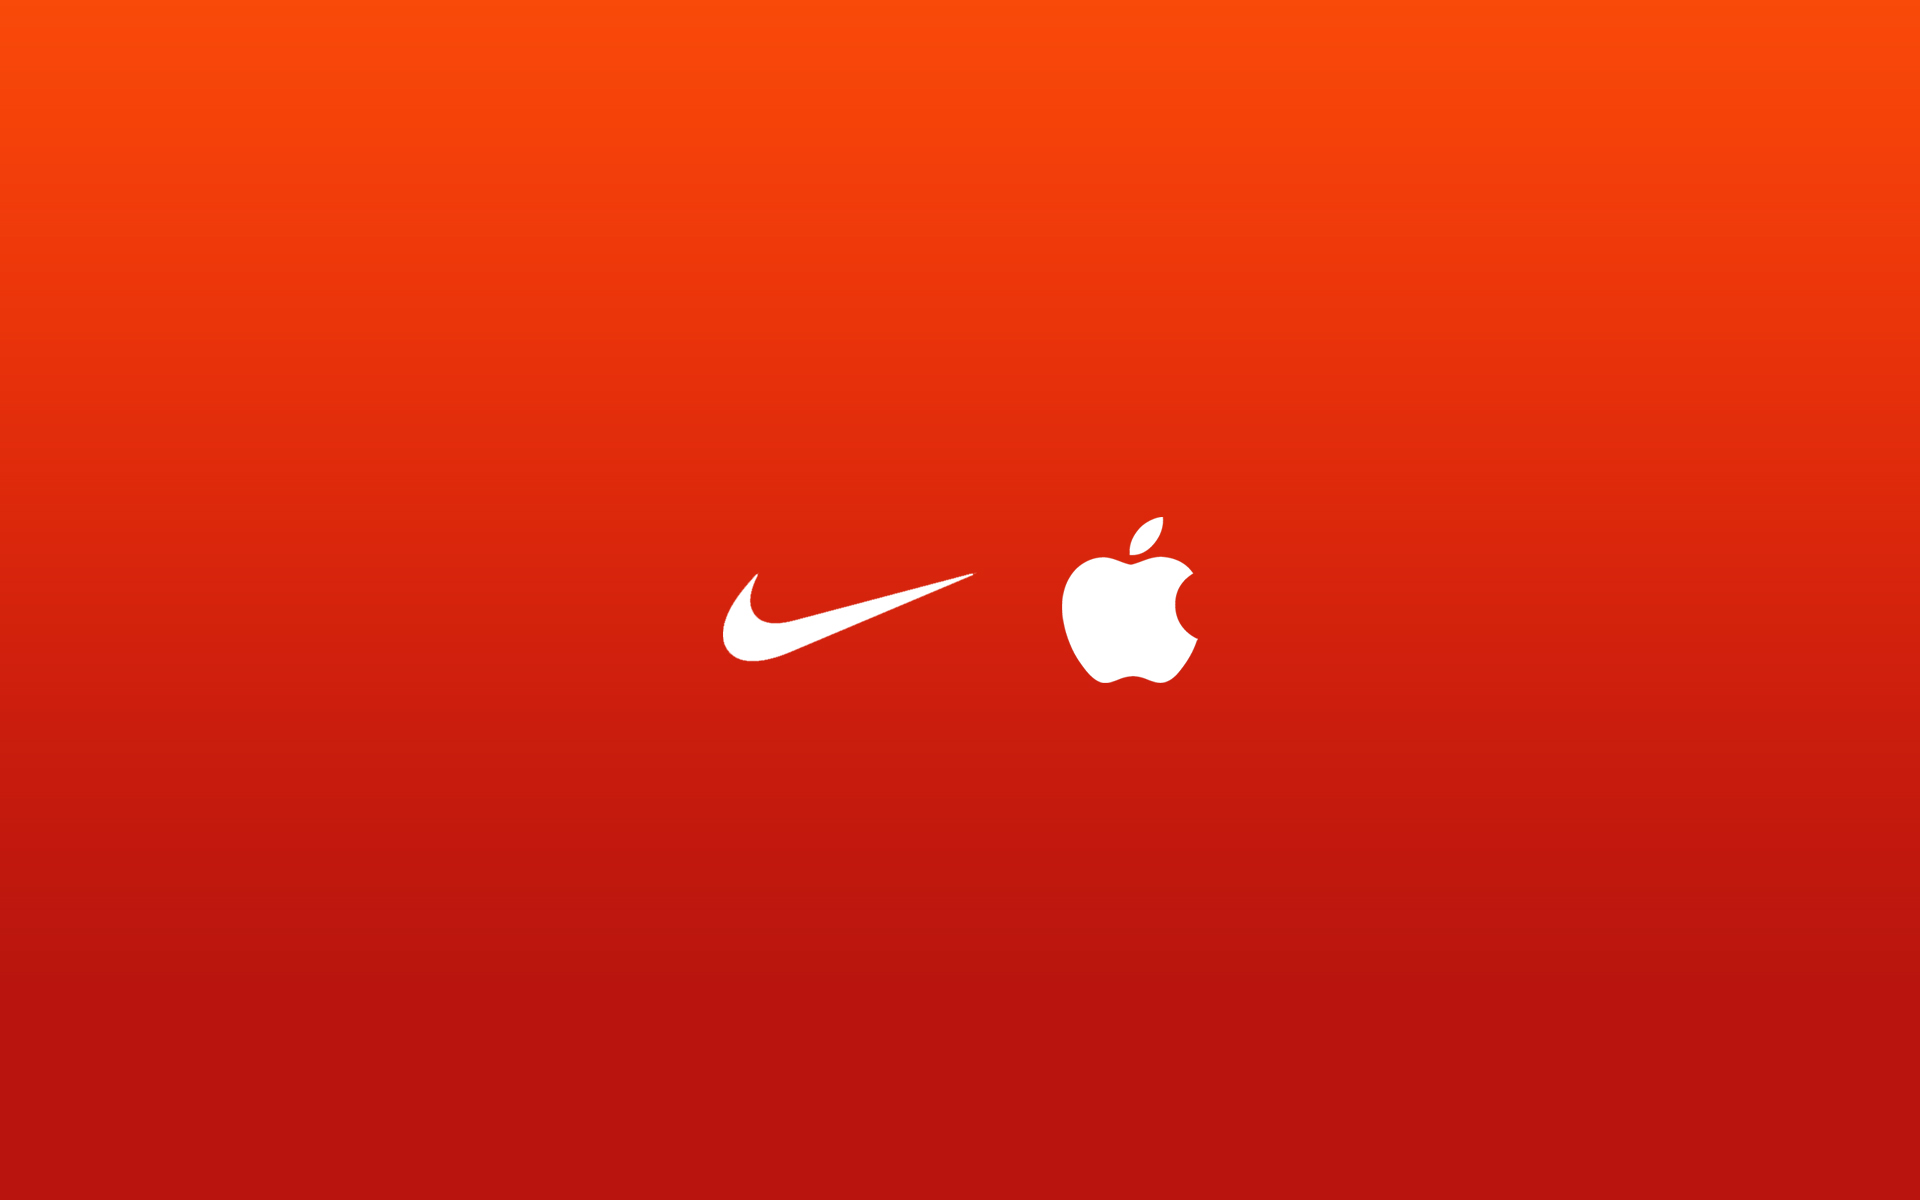 Nike iPod Wallpaper - Gallery - Wallpapers For All